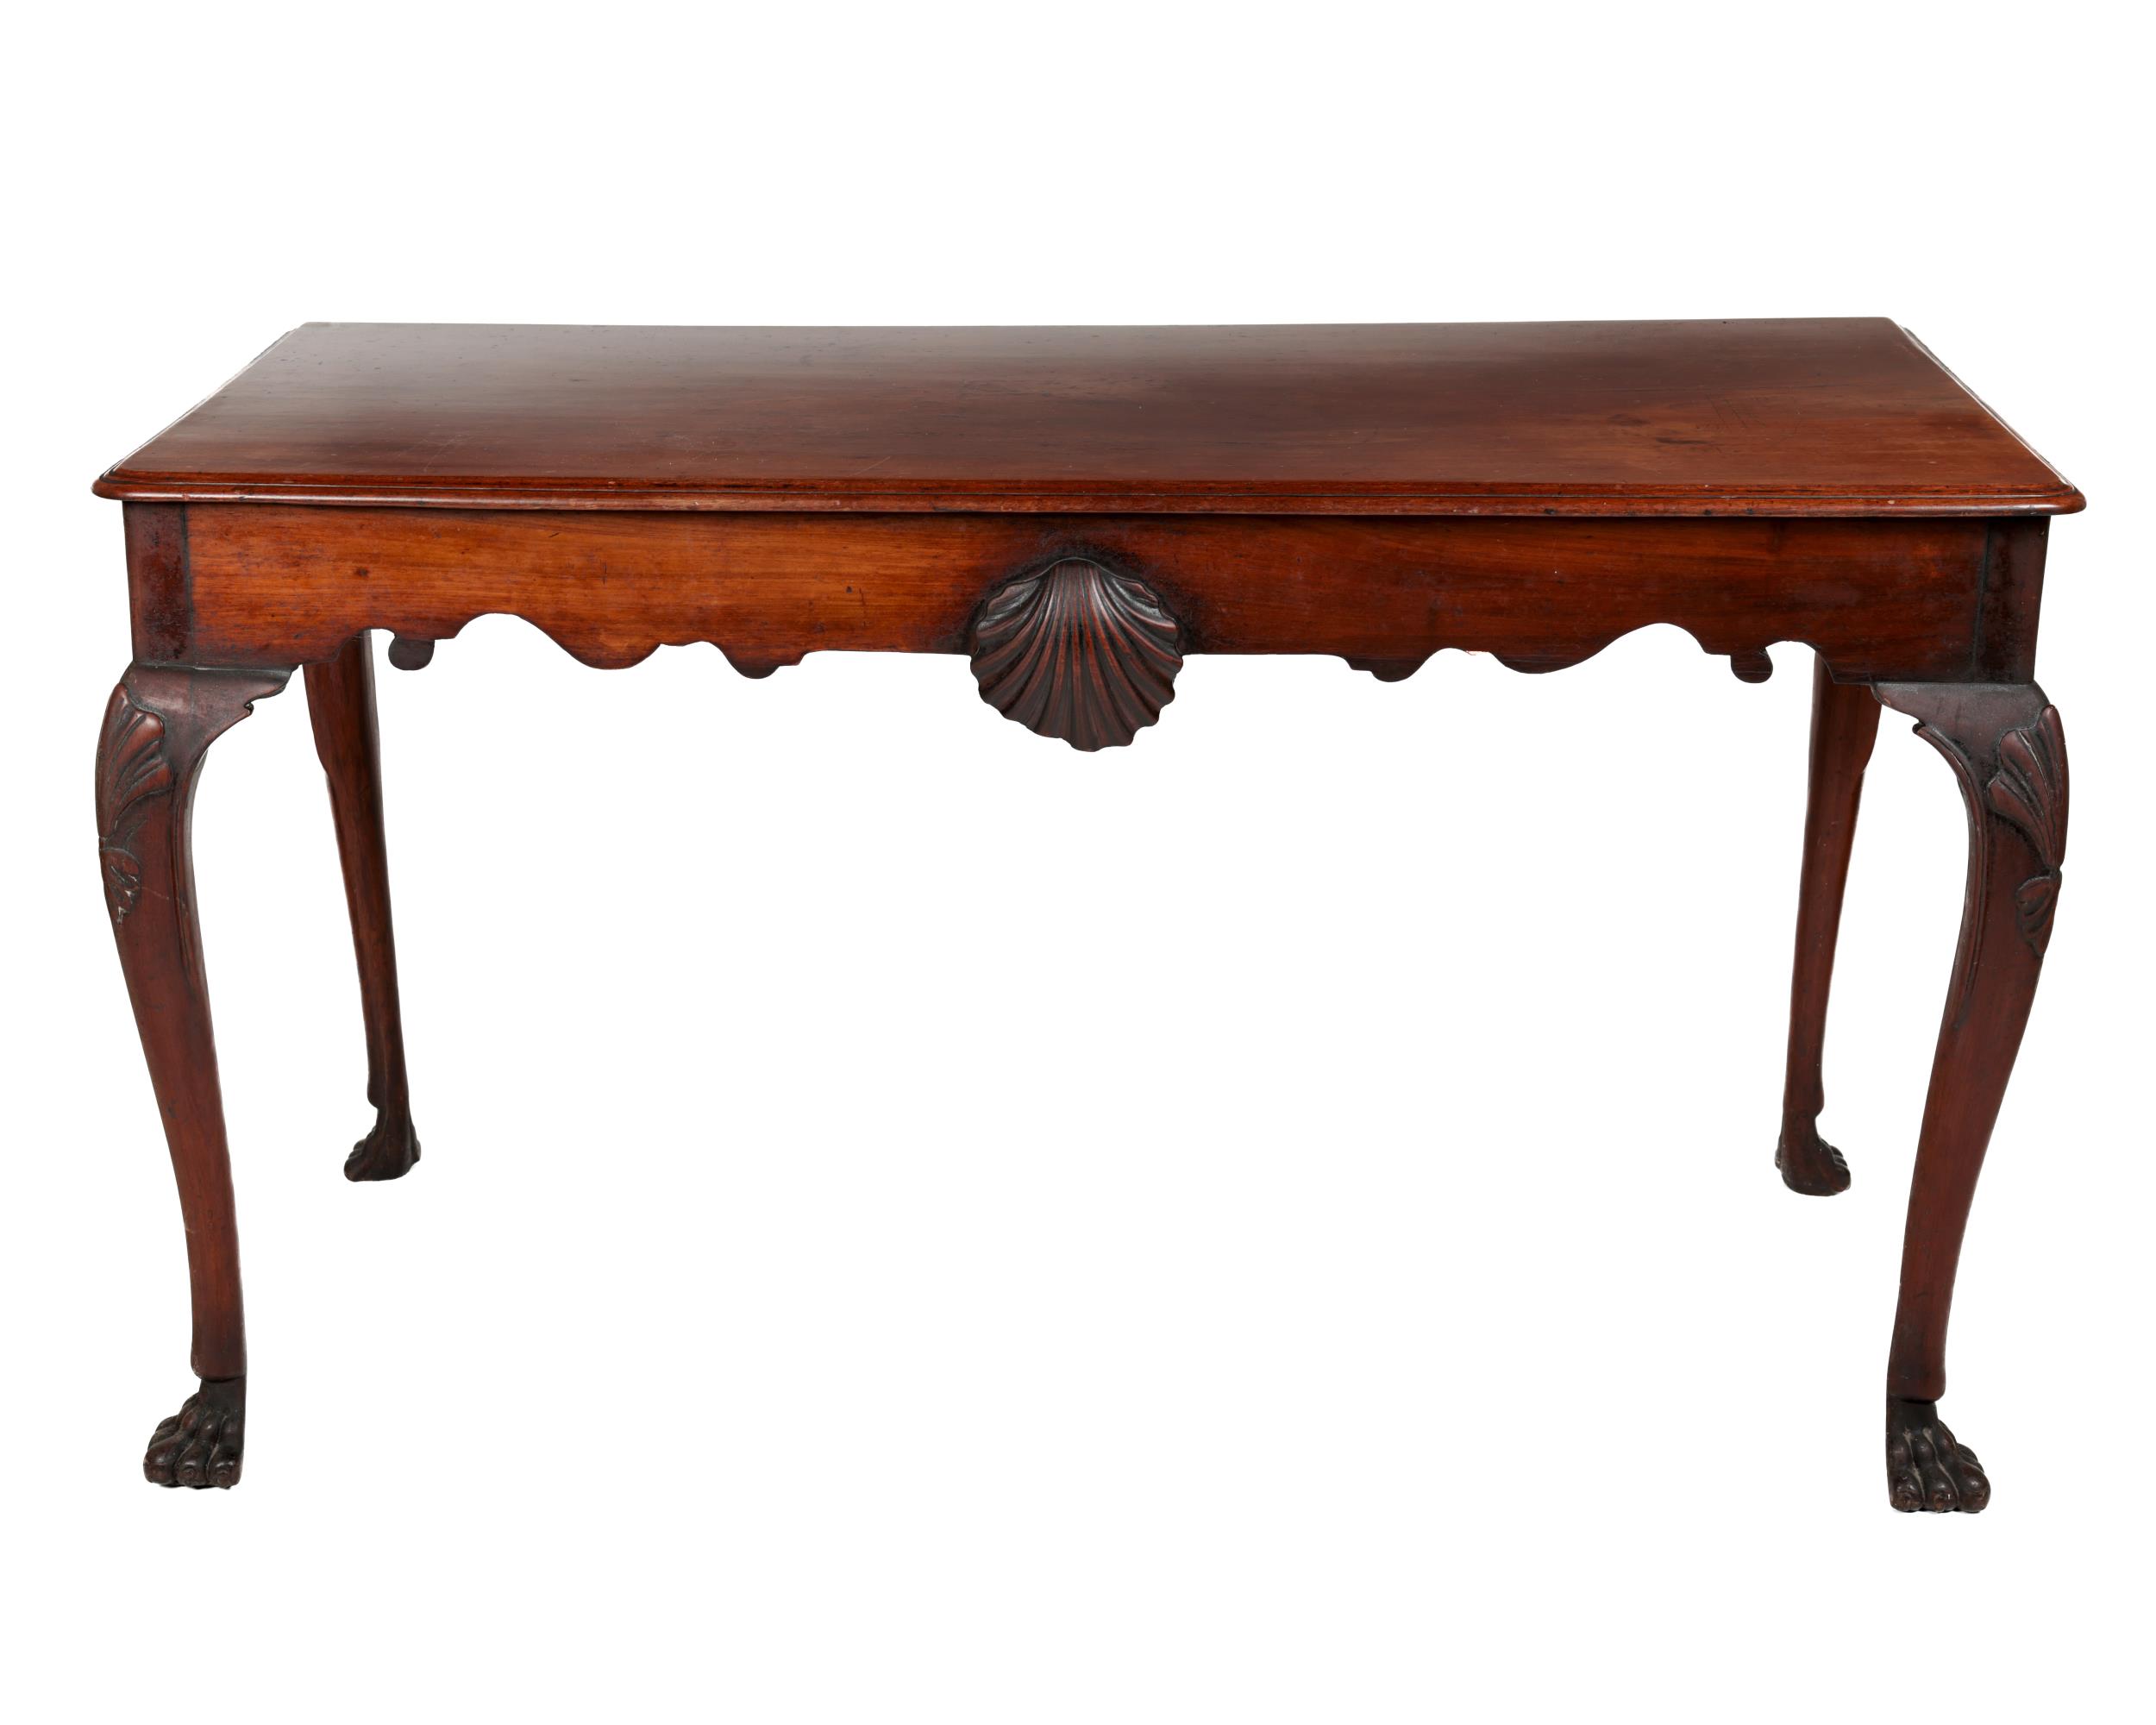 A fine quality early 19th Century Irish mahogany Side Table, the plain moulded top over a shaped